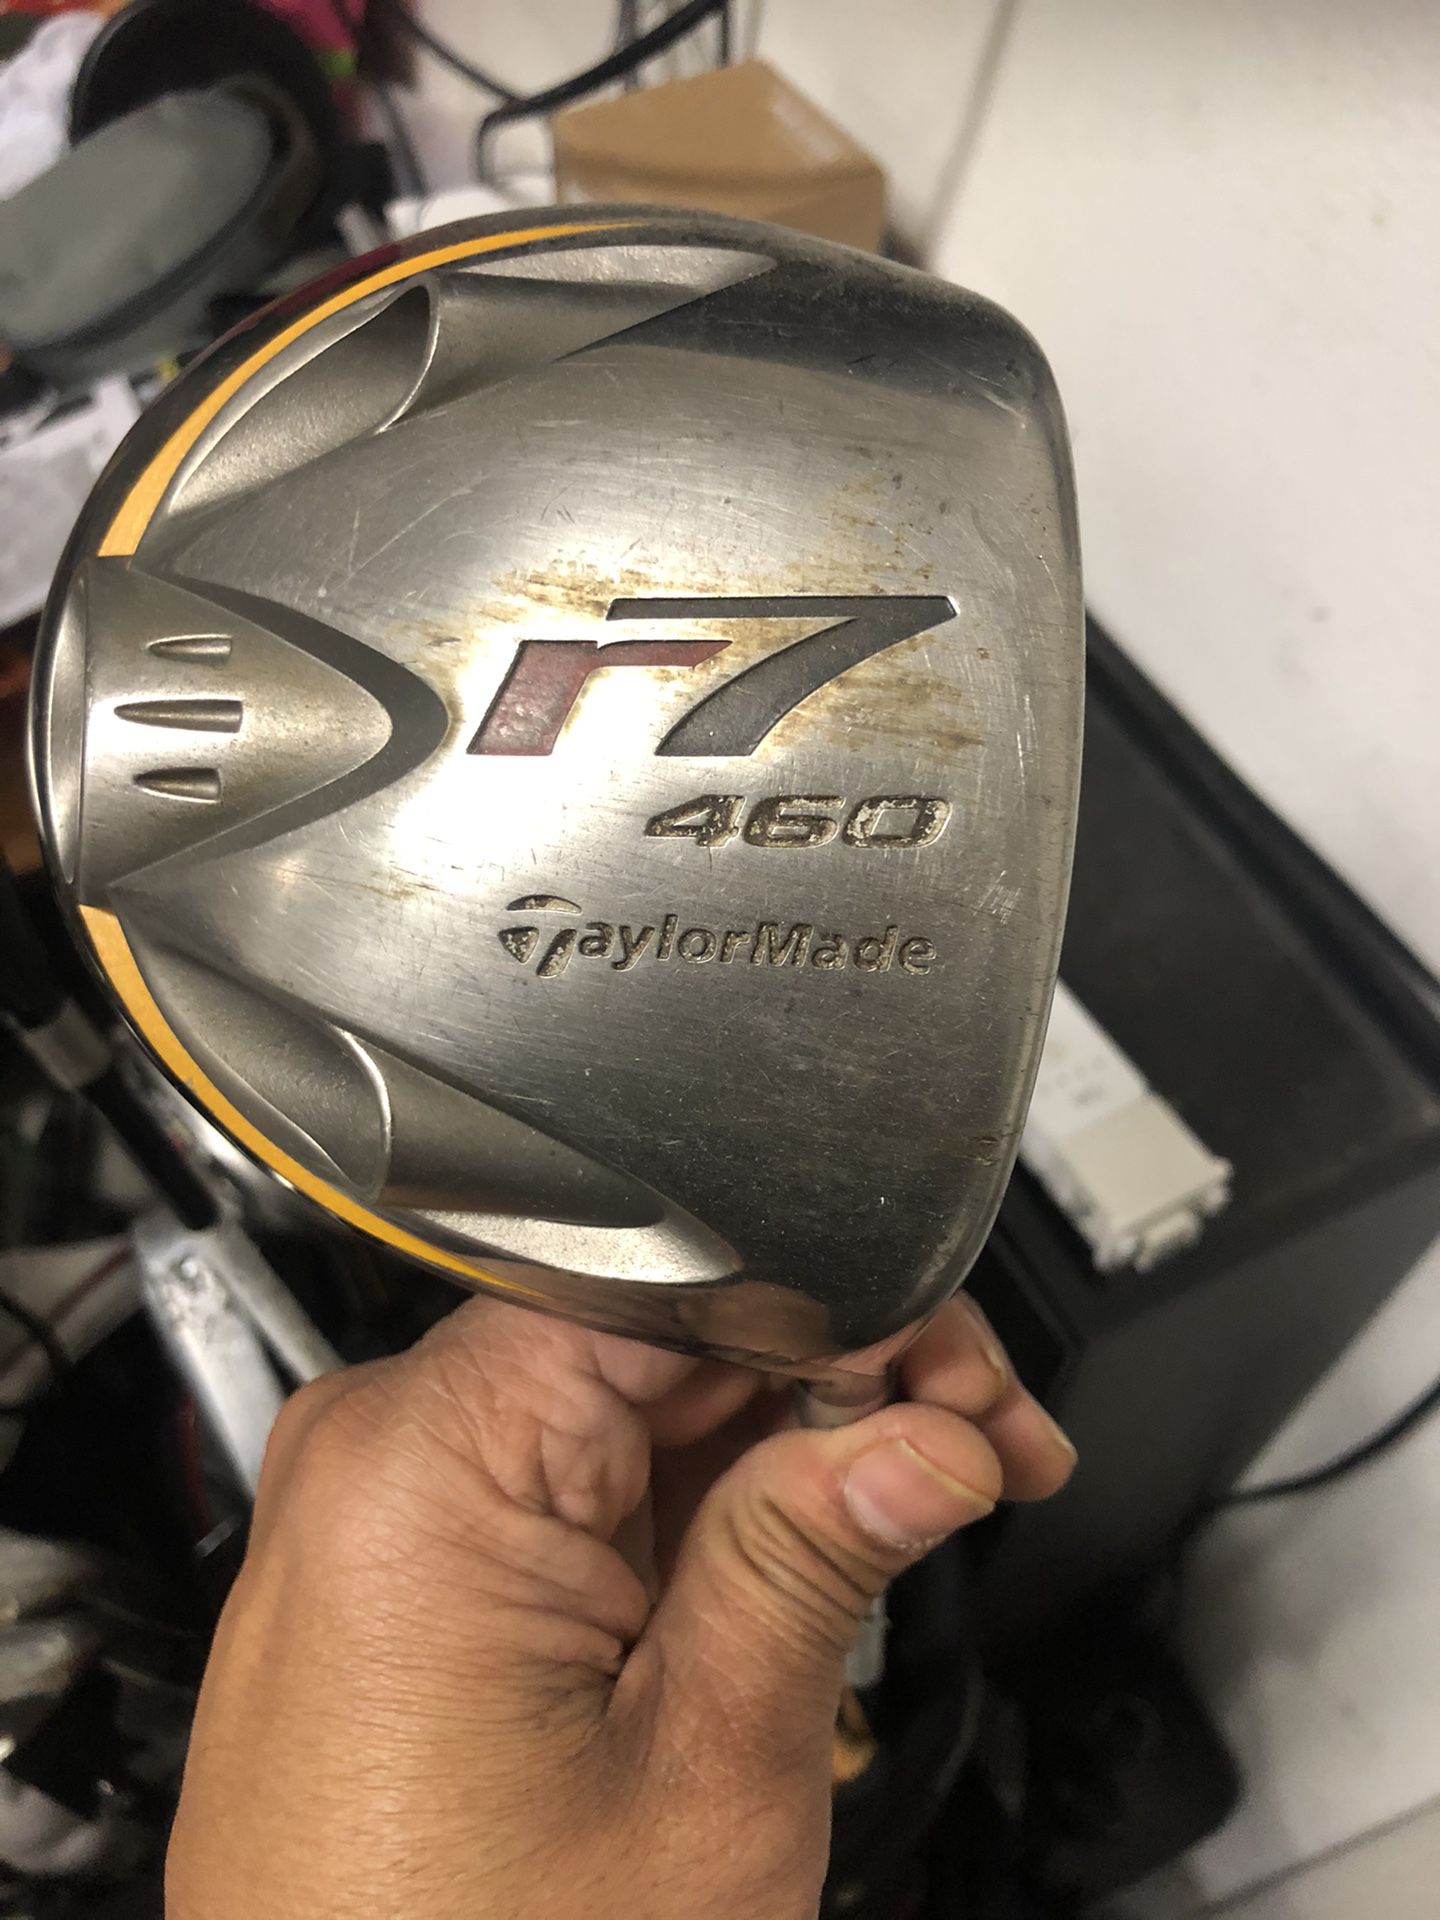 Taylor made burners irons, woods, Wilson bag and adidas shoes.